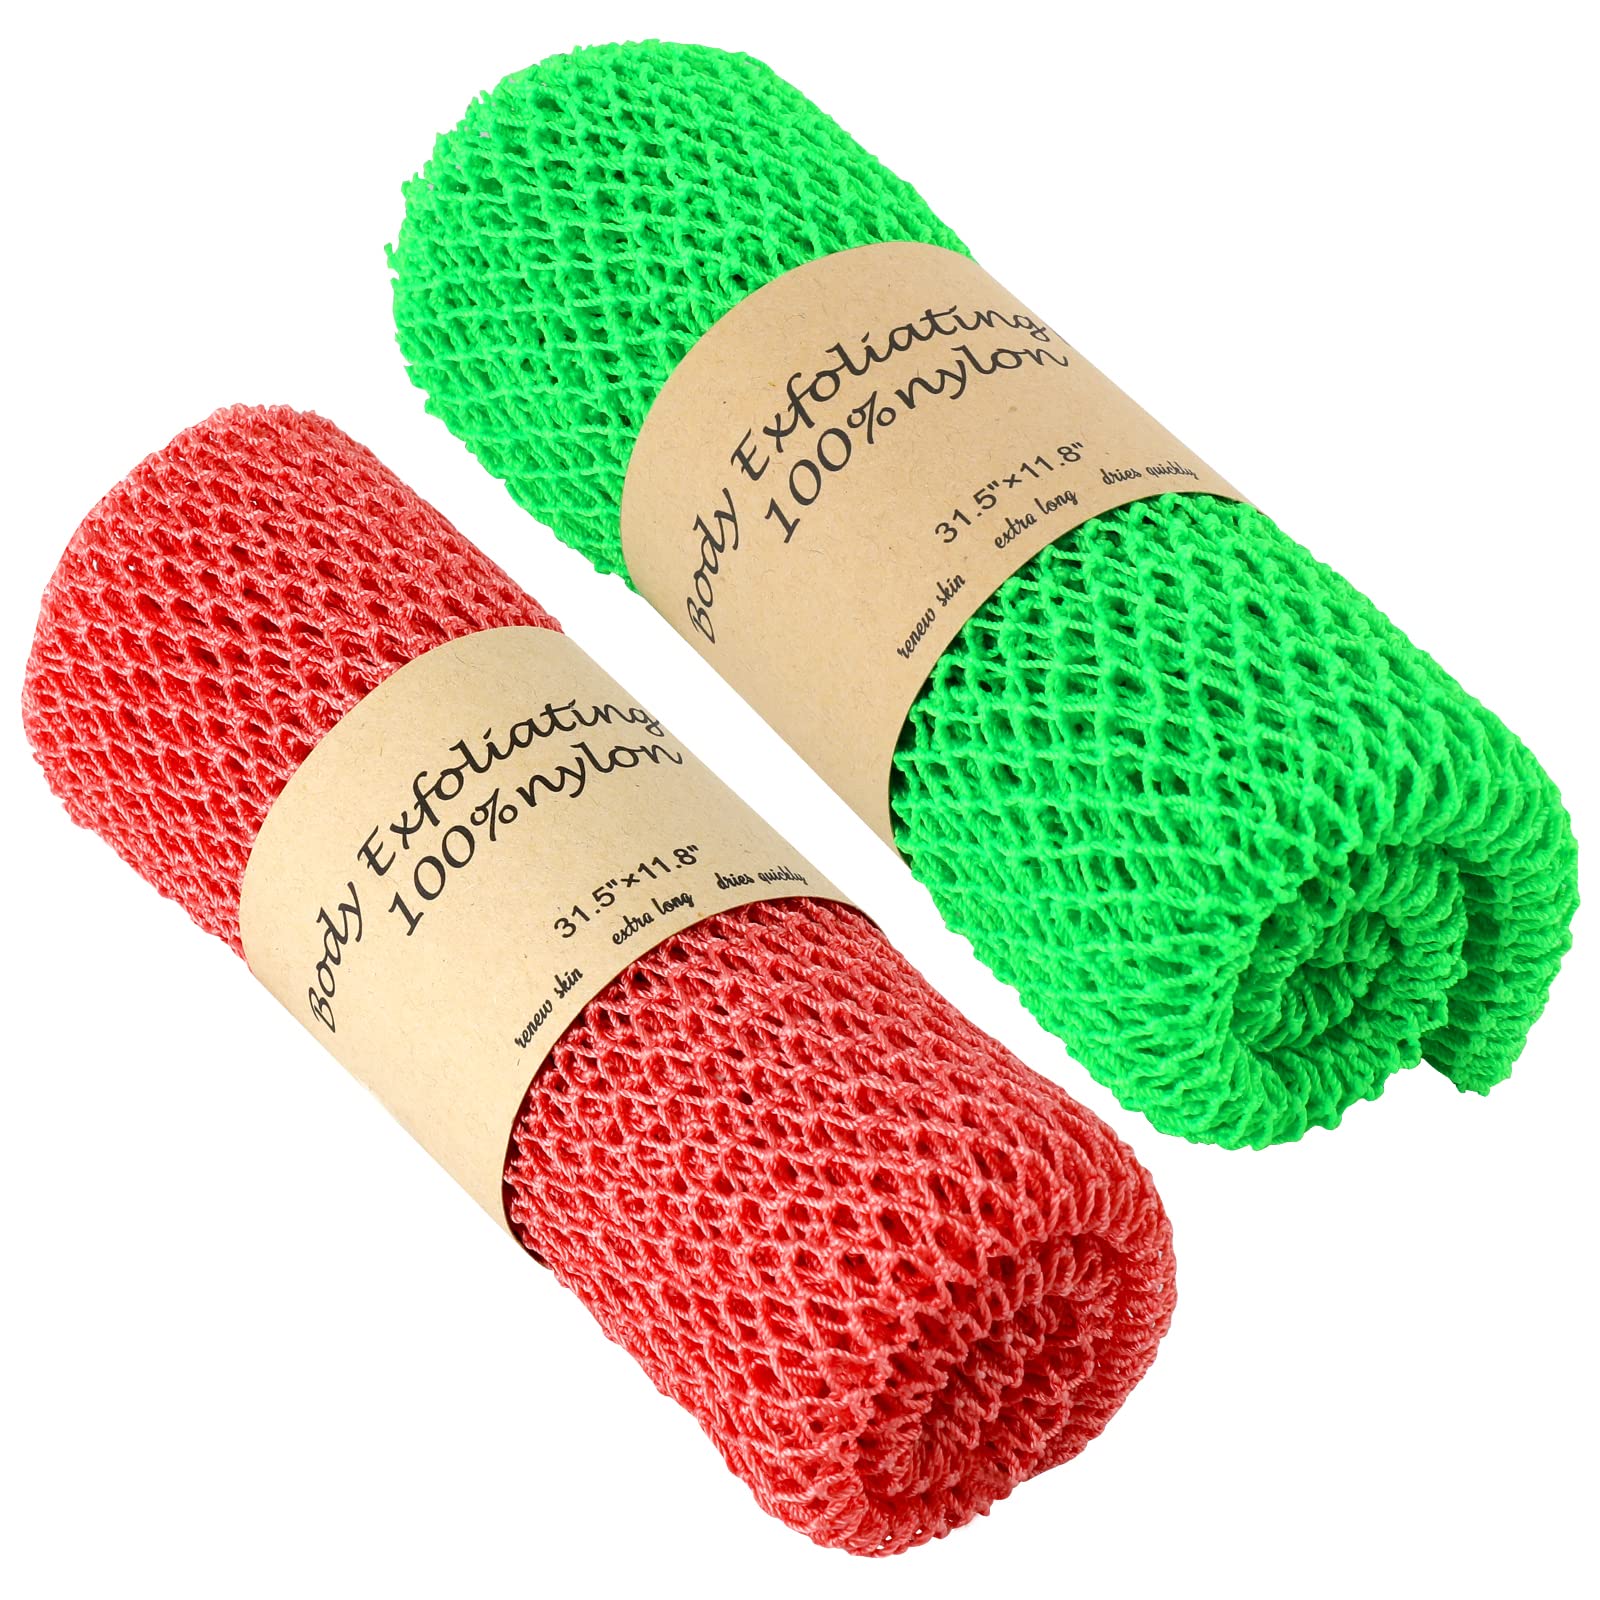 AbuQ 2 Pieces African net Sponge for exfoliating ,African